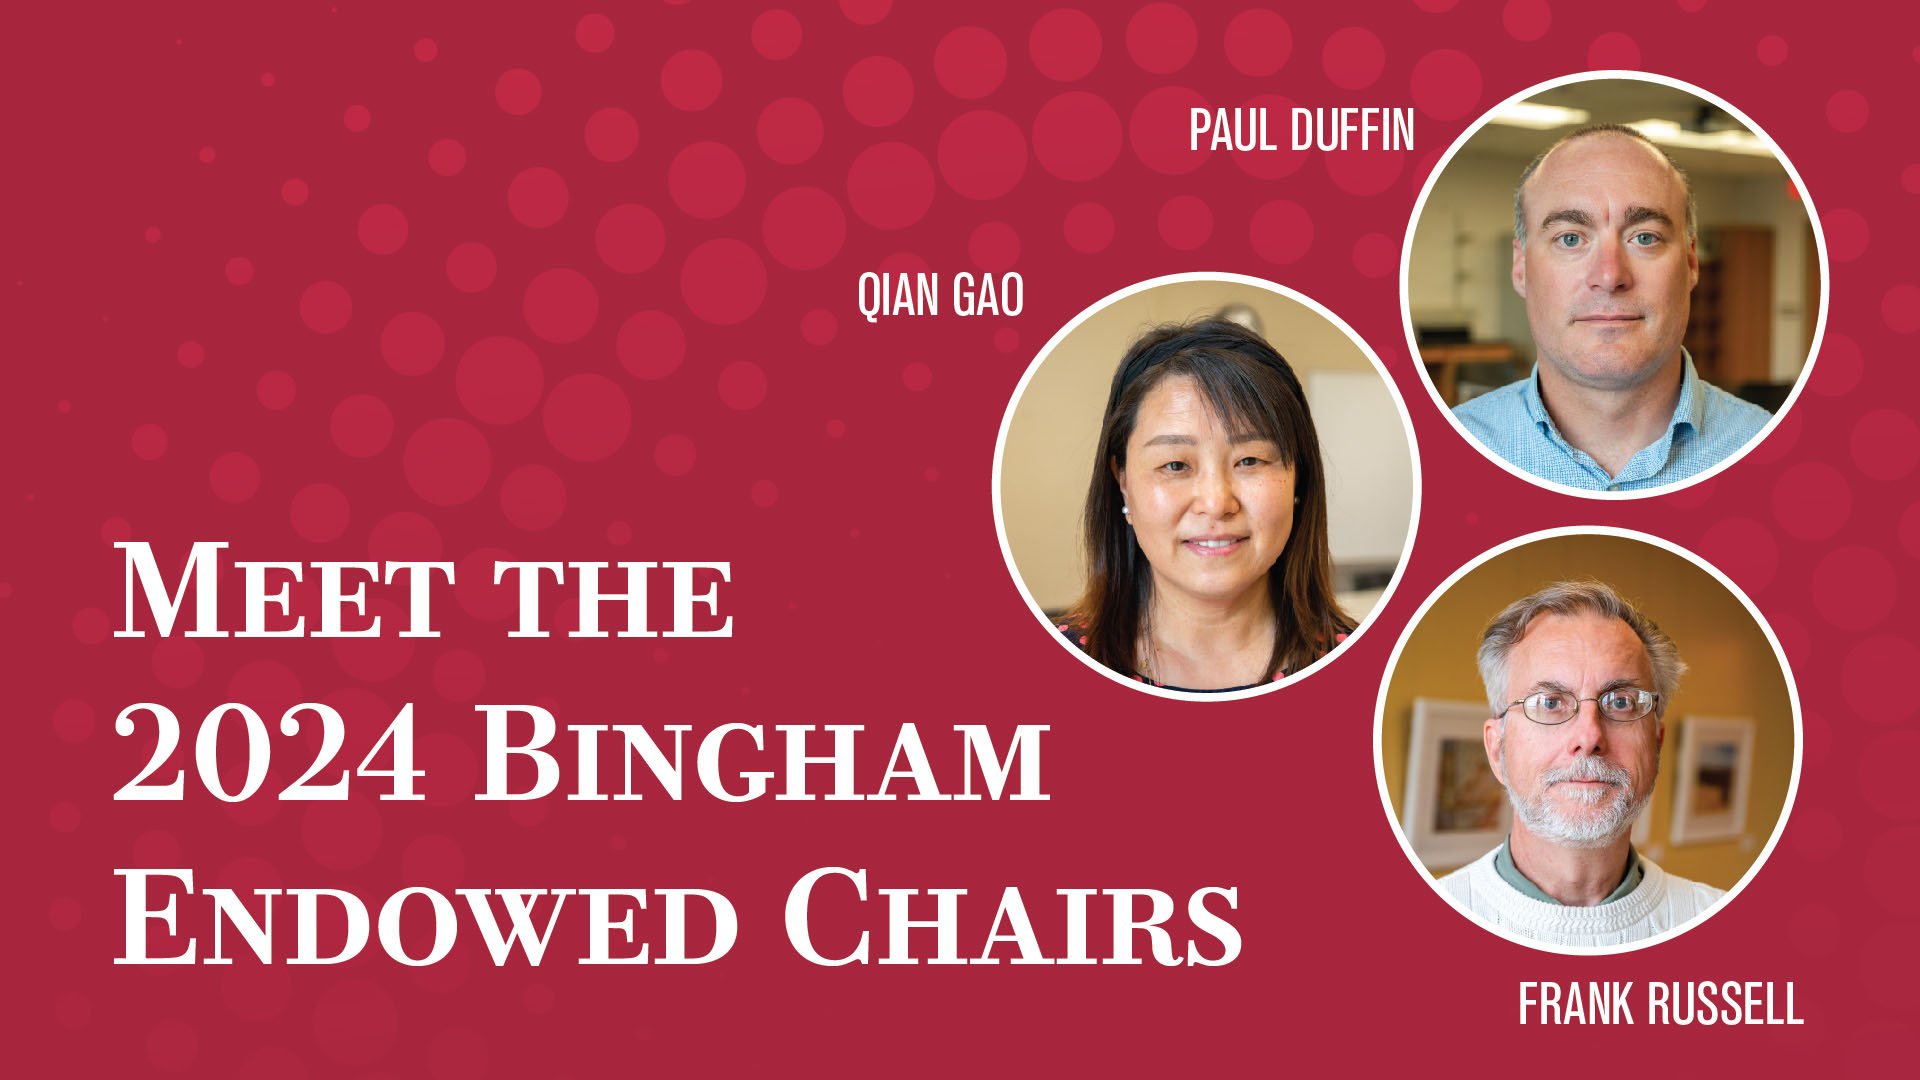 Inaugural Bingham Endowed Chairs for Teaching Excellence at Transylvania University selected